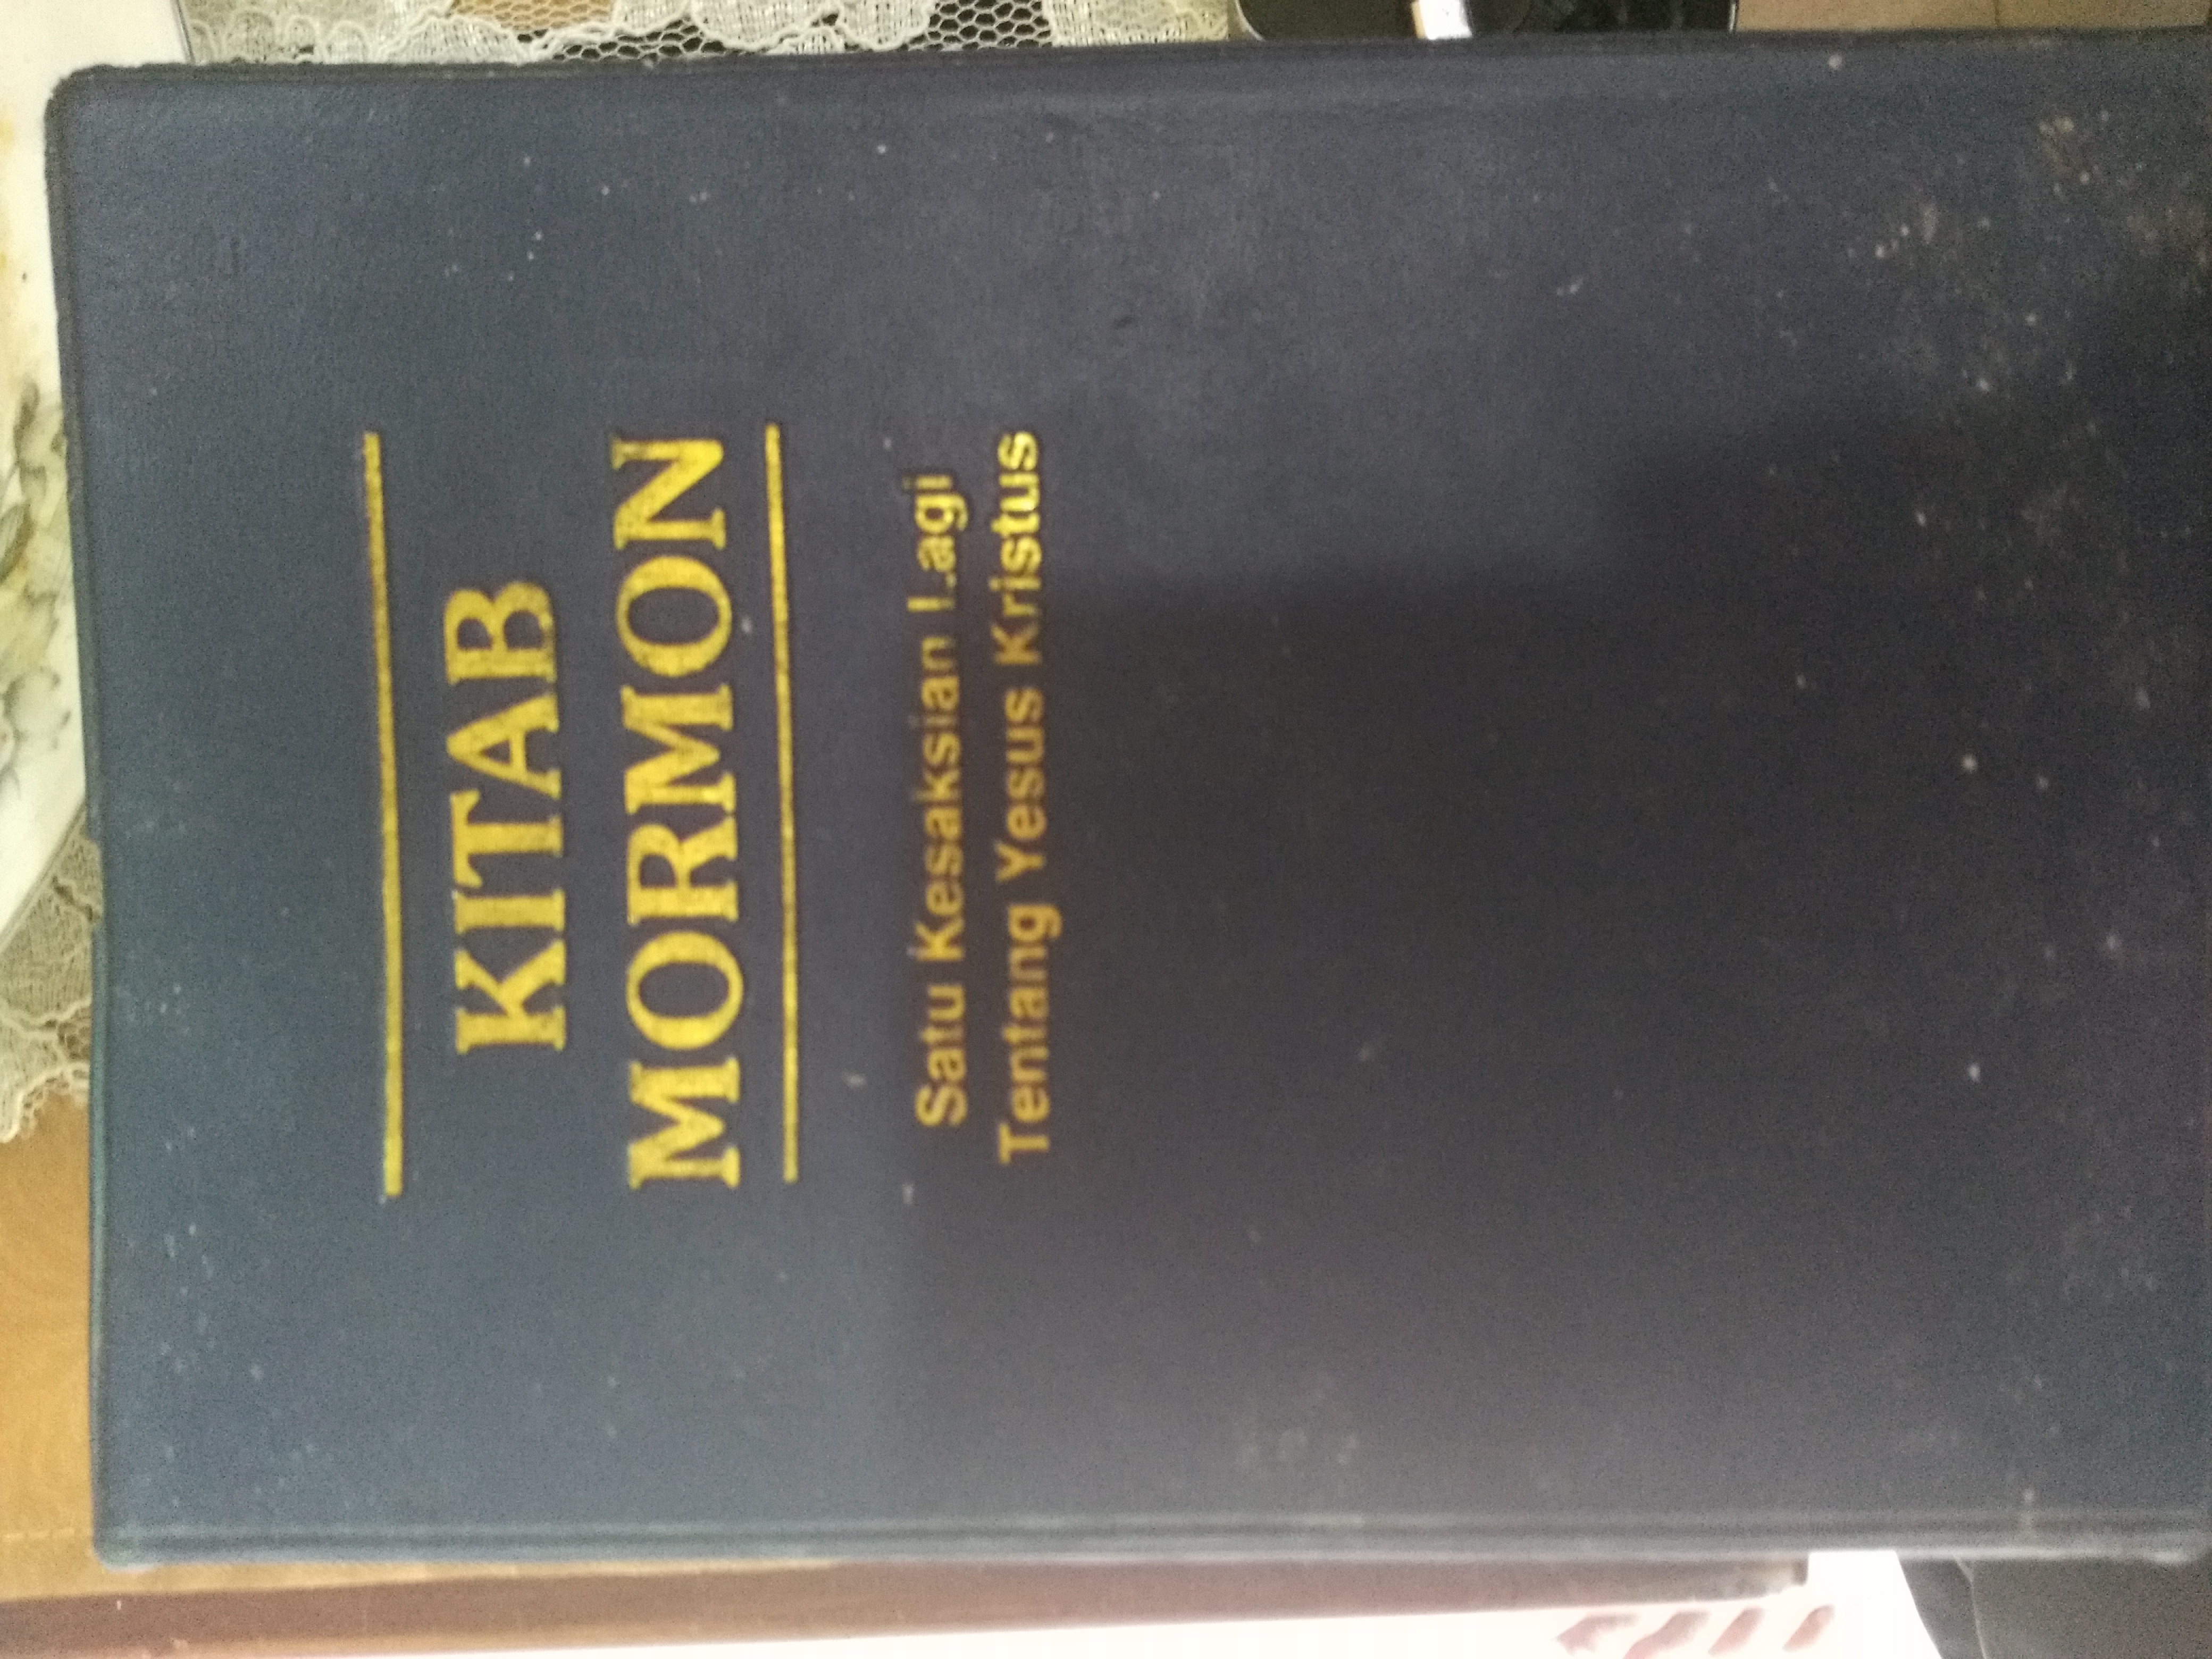 Nanang's copy of the Mormon Bible in Bahasa Indonesia which he had to secretively obtain.